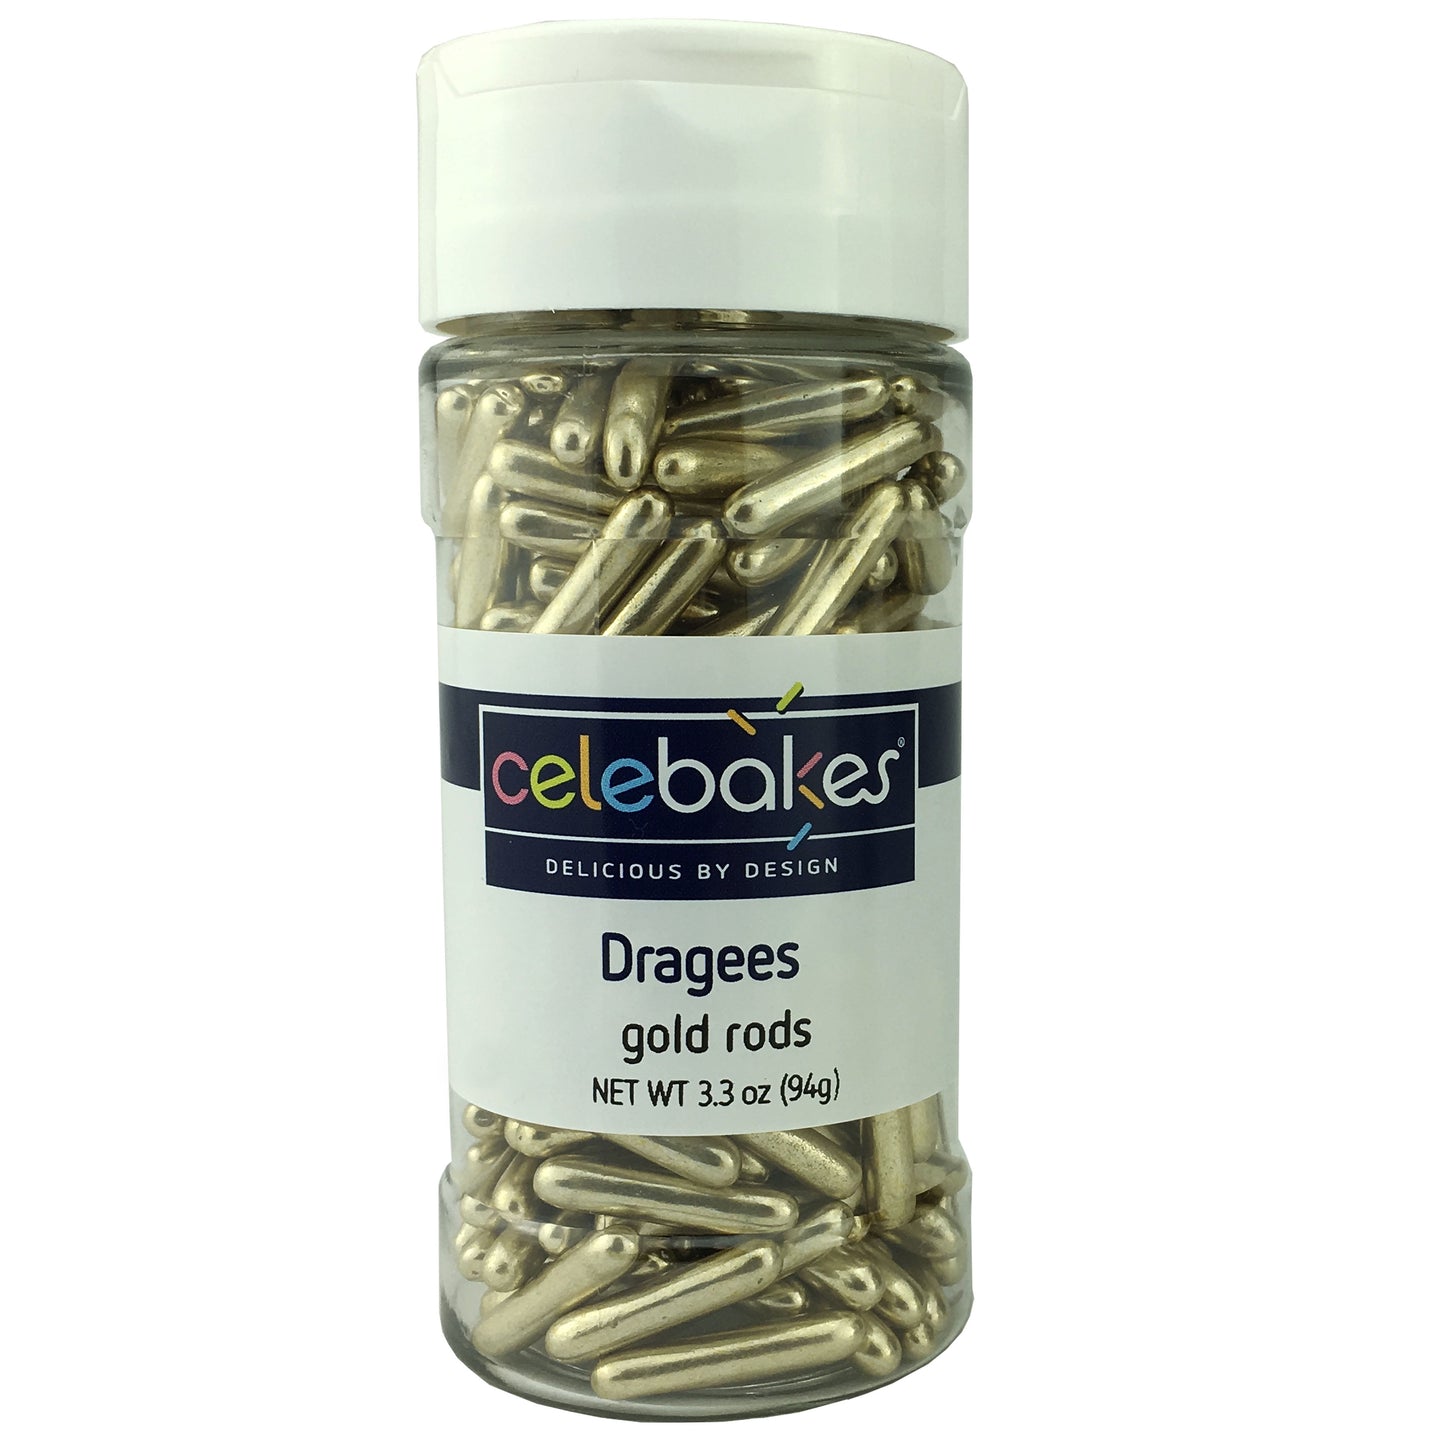 Celebakes Dragees Gold Rods